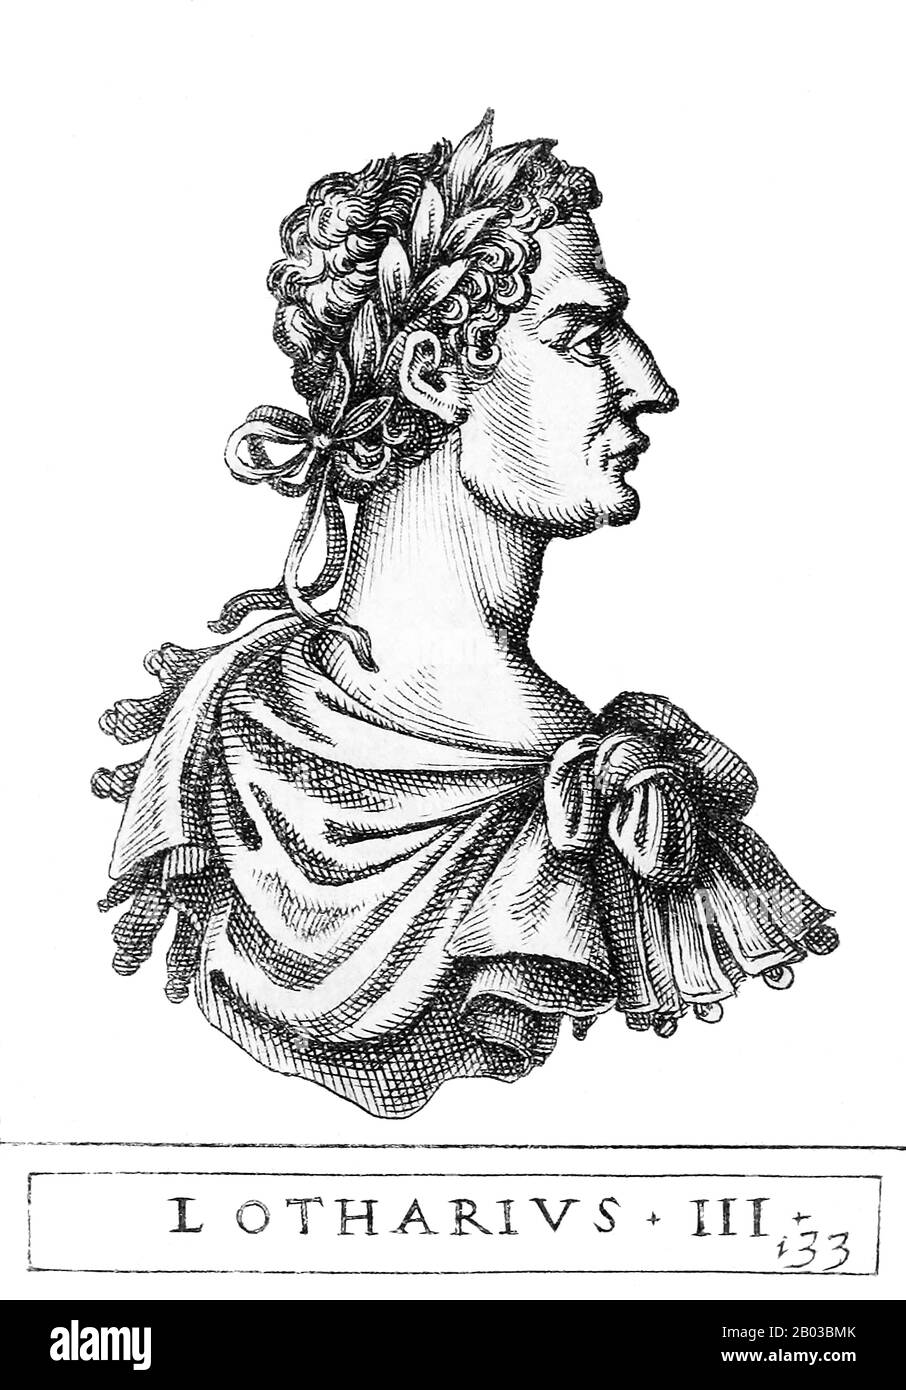 Lothair III (1075-1137), sometimes numbered Lothair II, was the son of Saxon count Gebhard of Supplinburg. He was Holy Roman emperor from 1133 until his death. Stock Photo